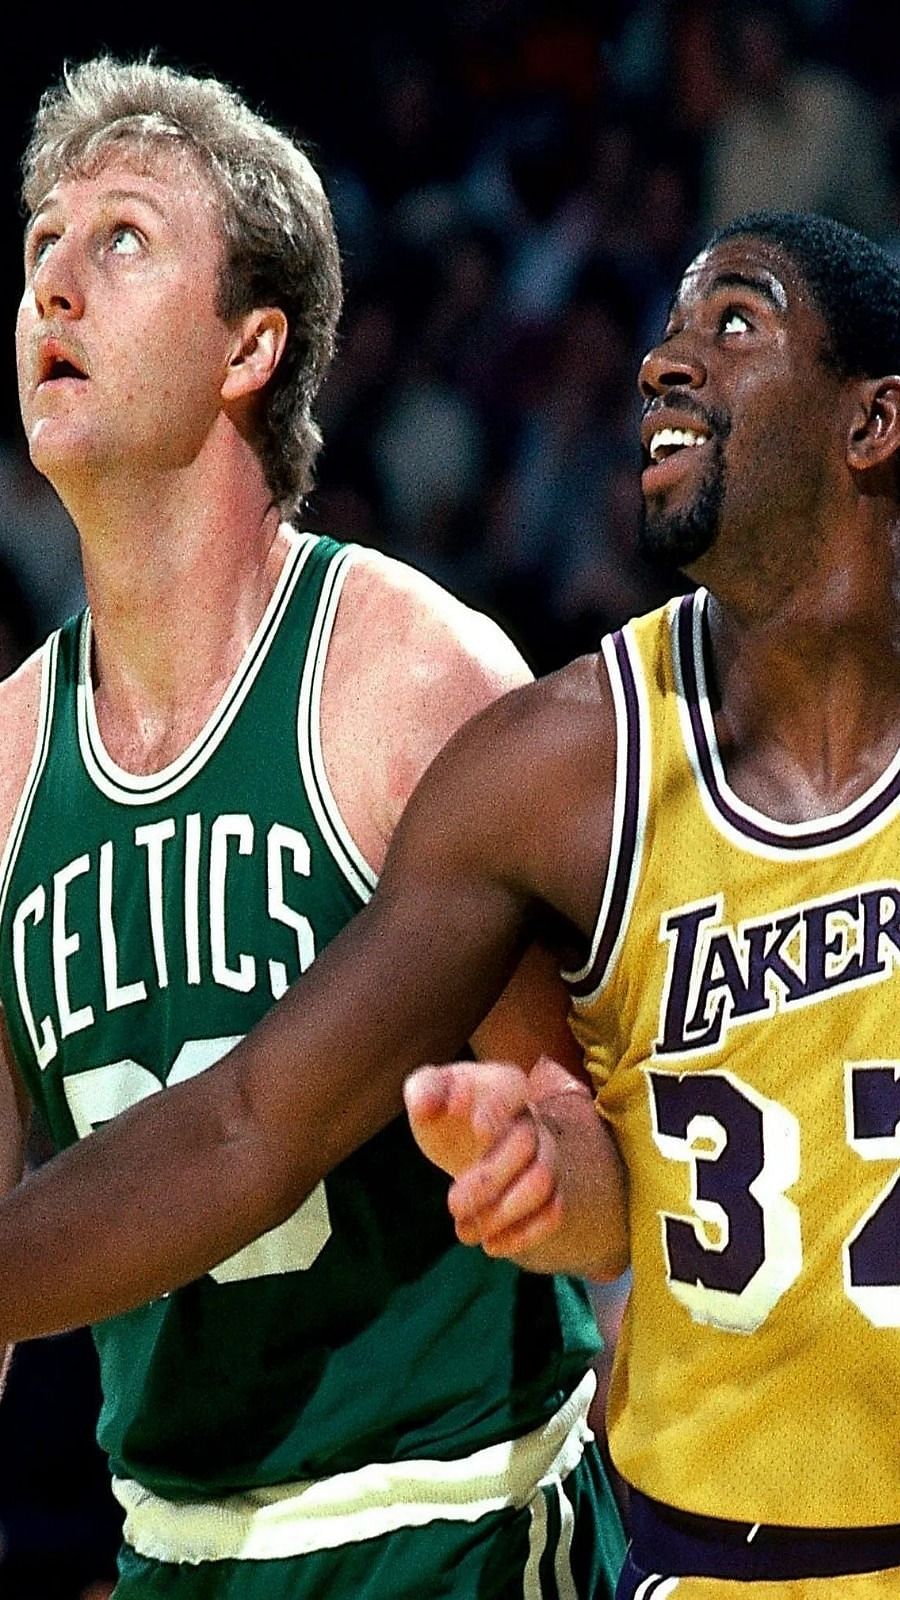 top 10 nba jerseys of all time